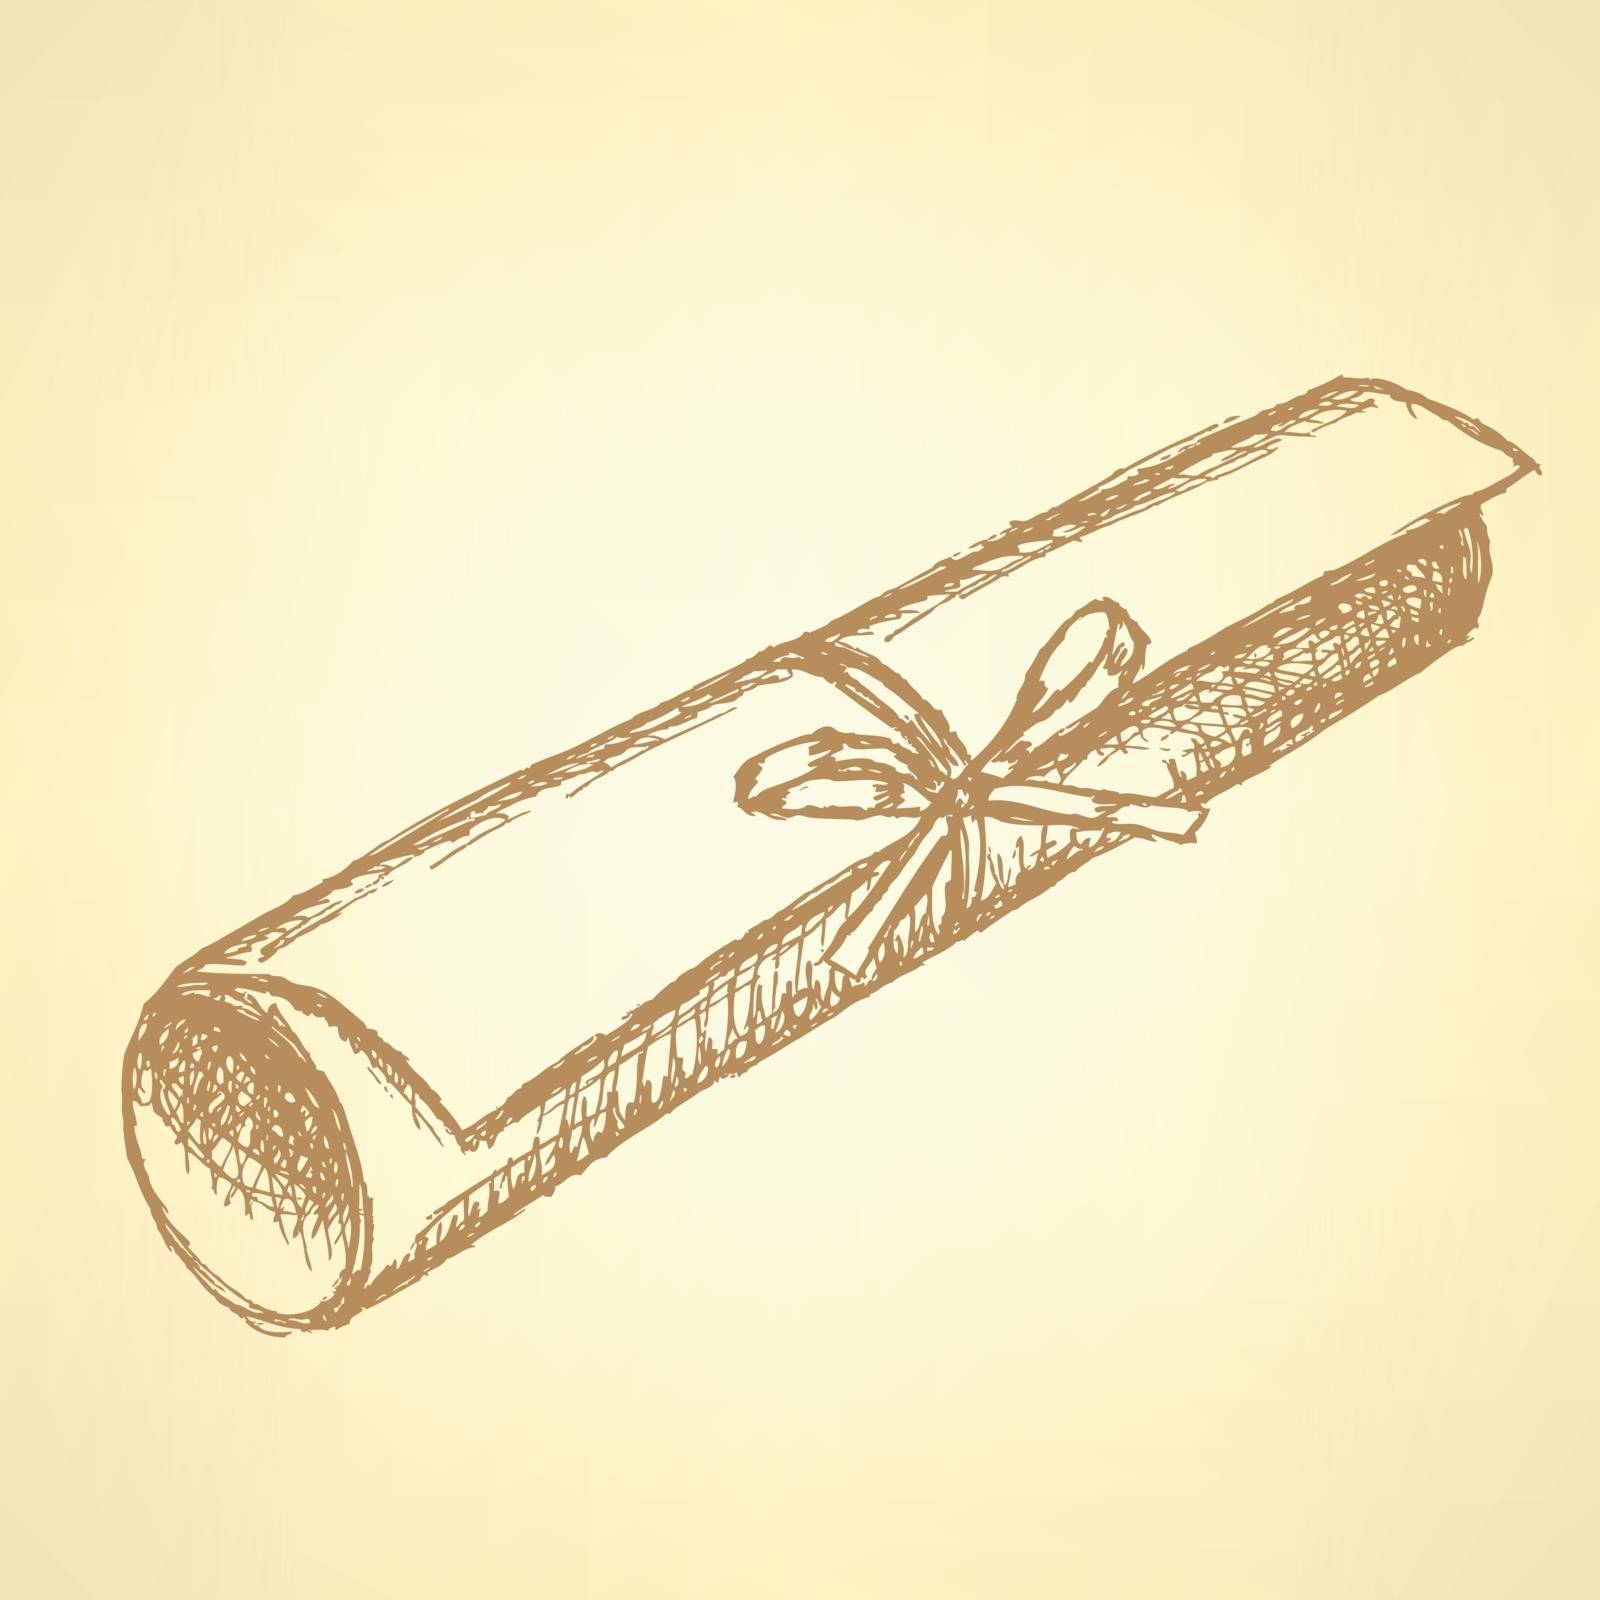 Sketch graduation diploma scroll in vintage style
